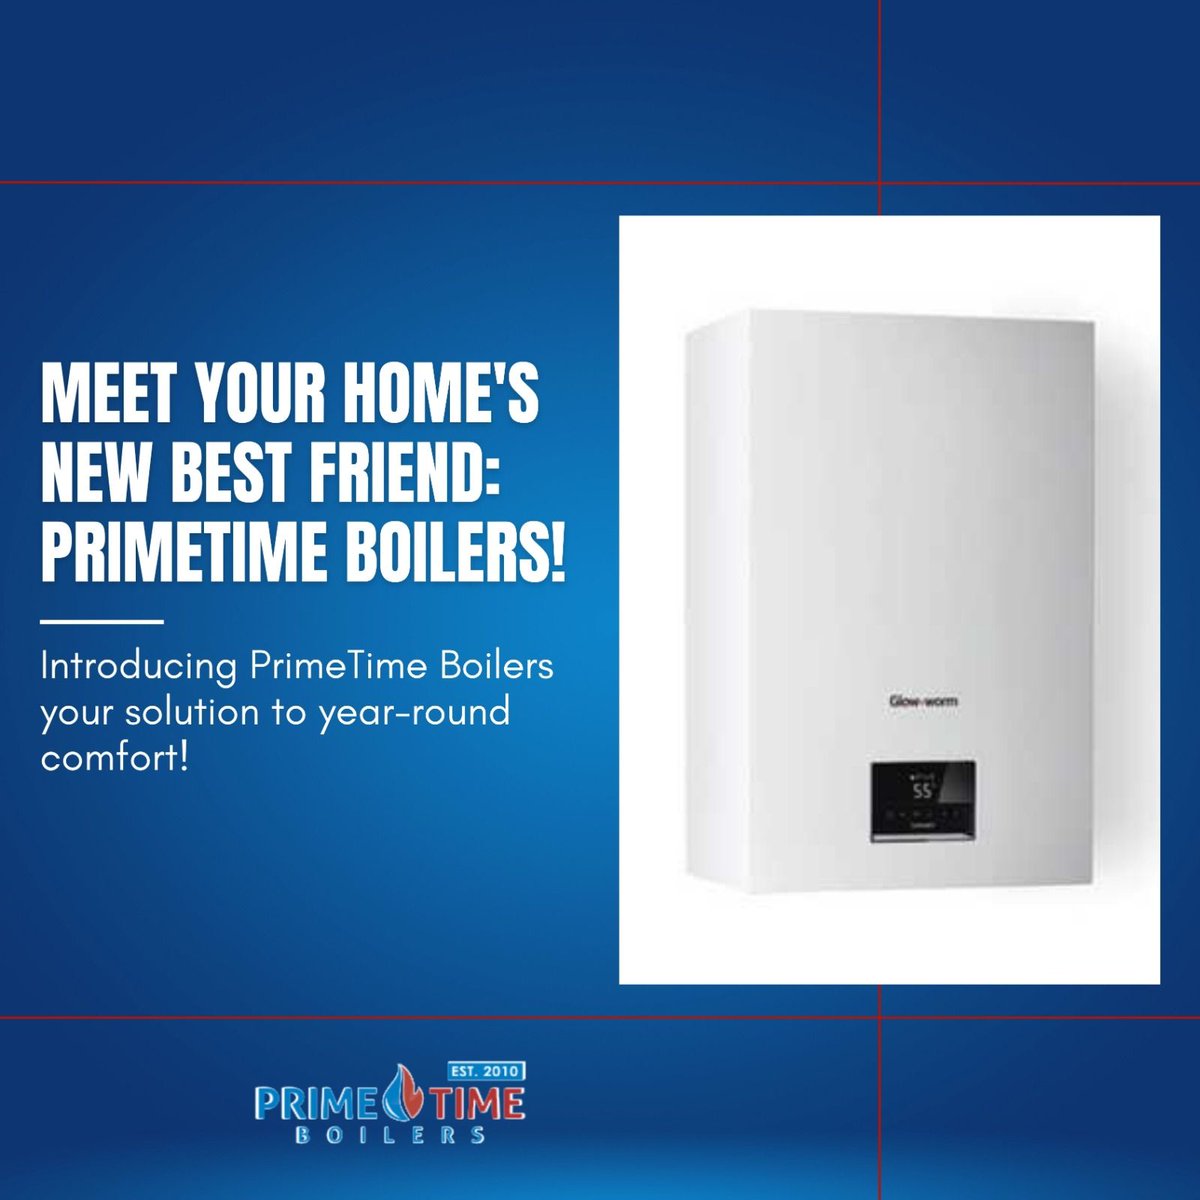 Introducing PrimeTime Boilers – your solution to year-round comfort! 🔥 Say goodbye to chilly mornings and hello to endless warmth with our state-of-the-art heating systems. With sleek design and unmatched efficiency.
.
.
.
.
#PrimeTimeBoilers #HomeComfort #EfficientHeating